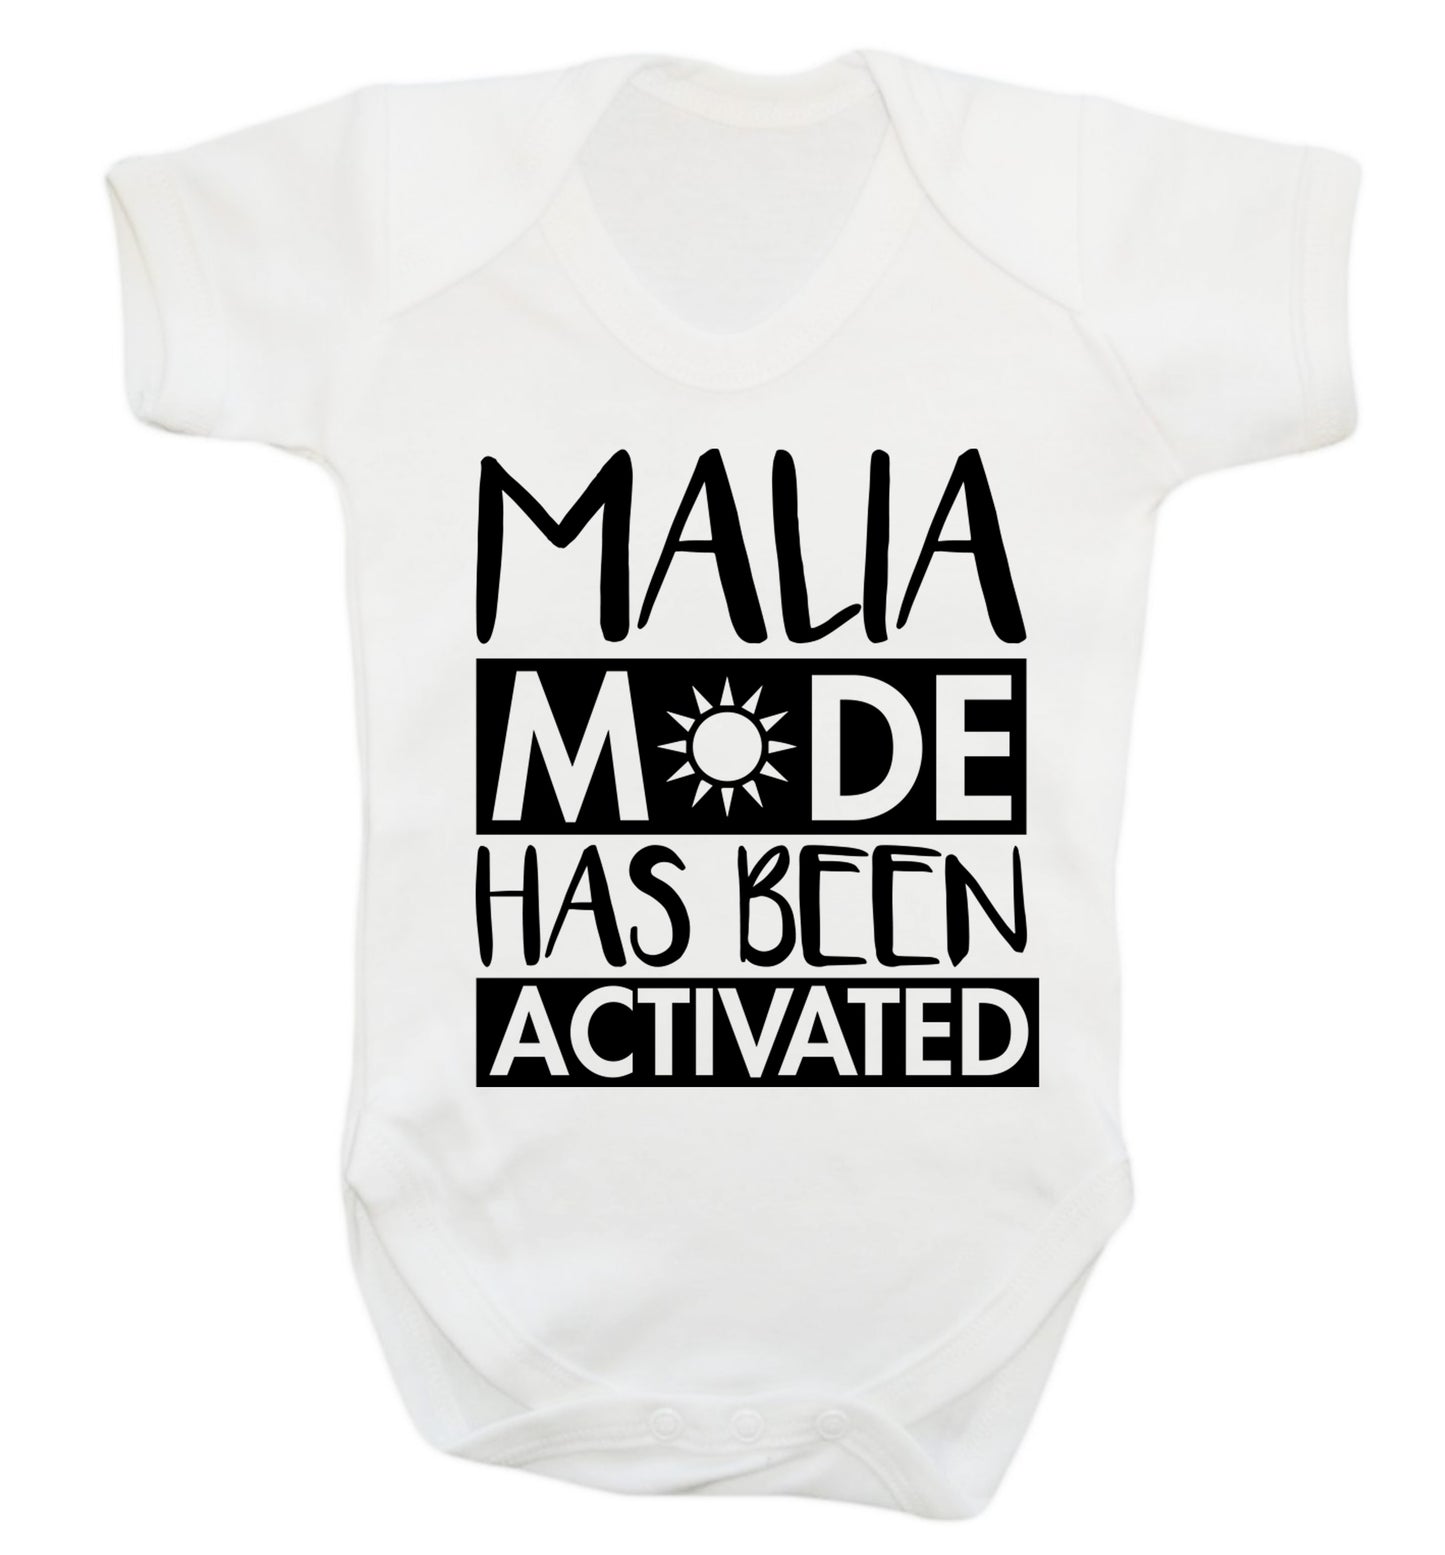 Malia mode has been activated Baby Vest white 18-24 months